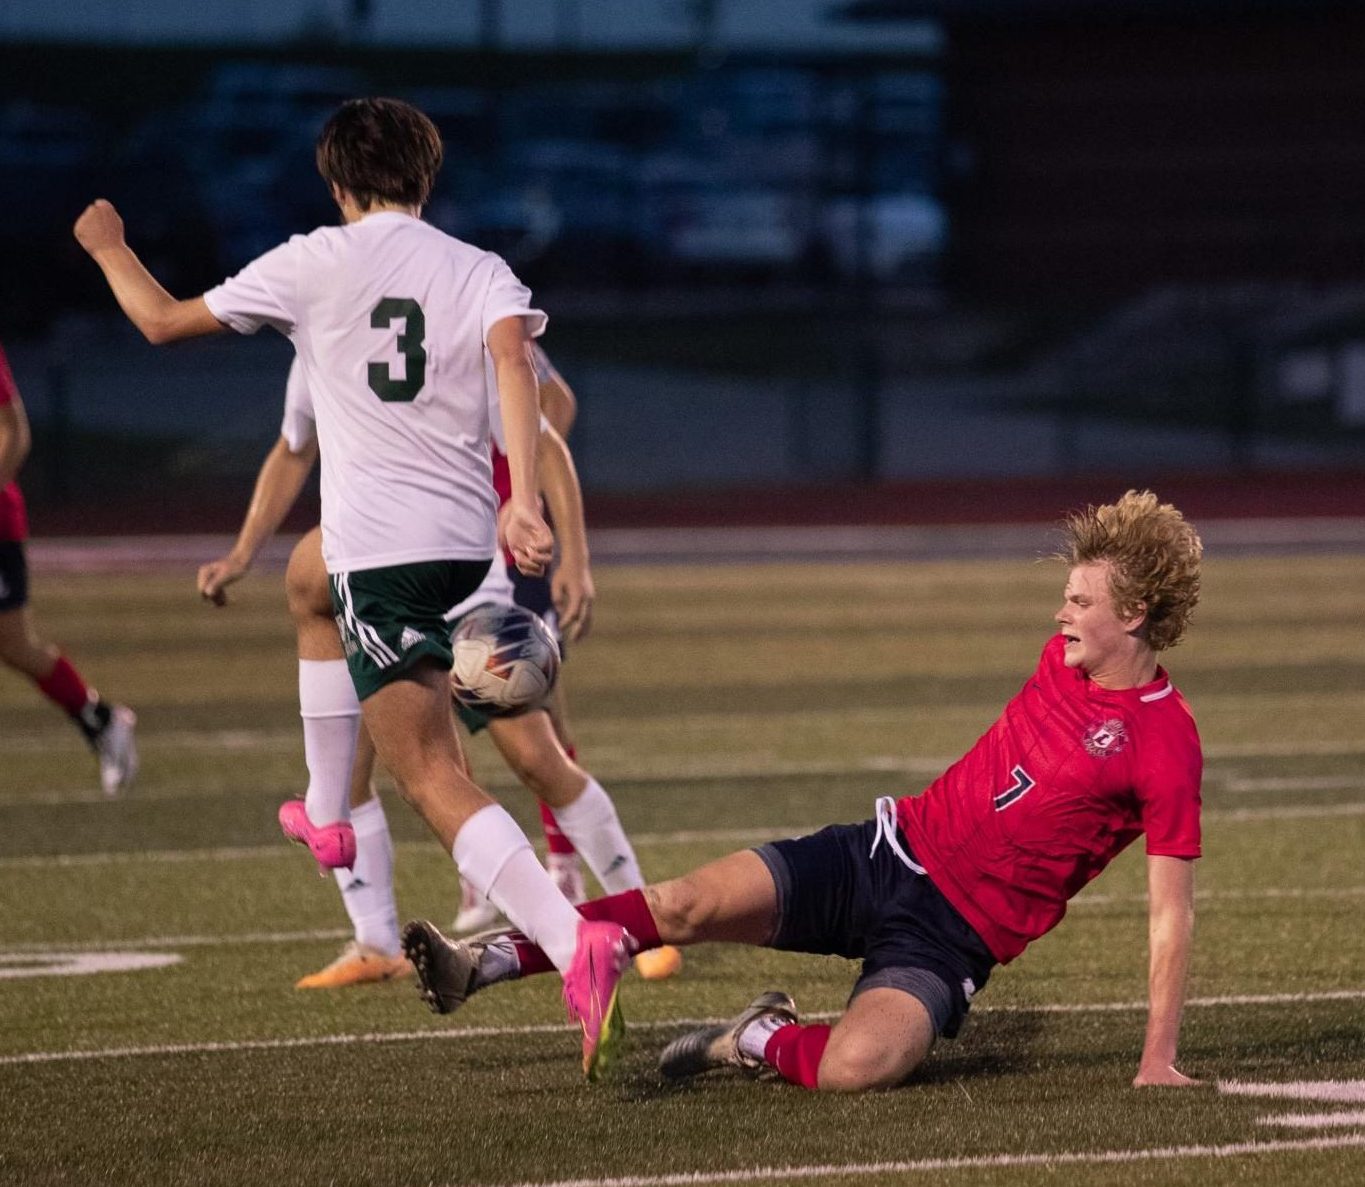 Senior Brady Freeman (#7) slides under a defender hoping to gain possession of the ball.